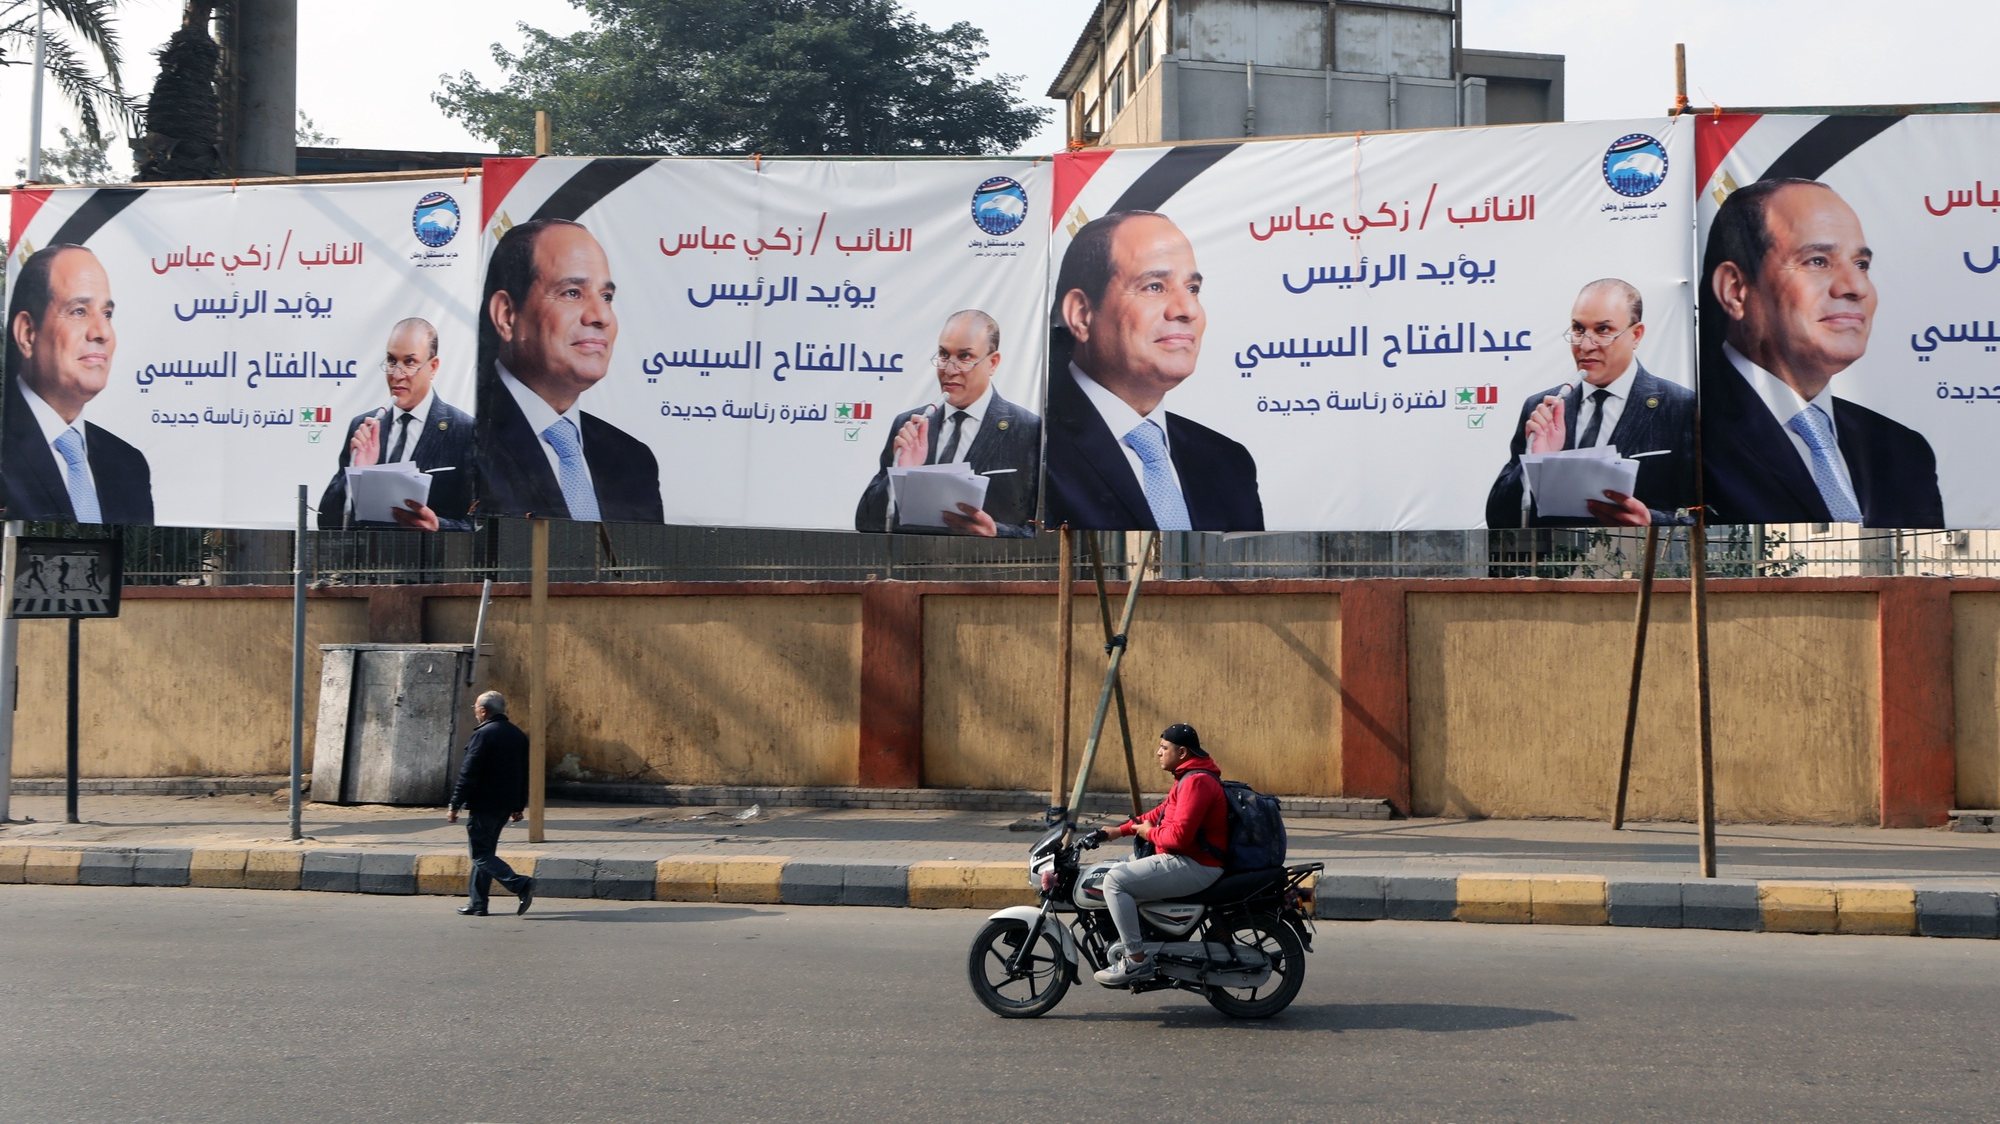 epa11013377 Vehicles drive near election campaign banners of Egyptian incumbent President Abdel Fattah al-Sisi in Cairo, Egypt, 06 December 2023. The Egyptian Elections Committee announced on 08 November that three candidates will be running against incumbent President Abdel Fattah al-Sisi in the upcoming elections taking place in Egypt on 10, 11 and 12 December 2023.  EPA/KHALED ELFIQI